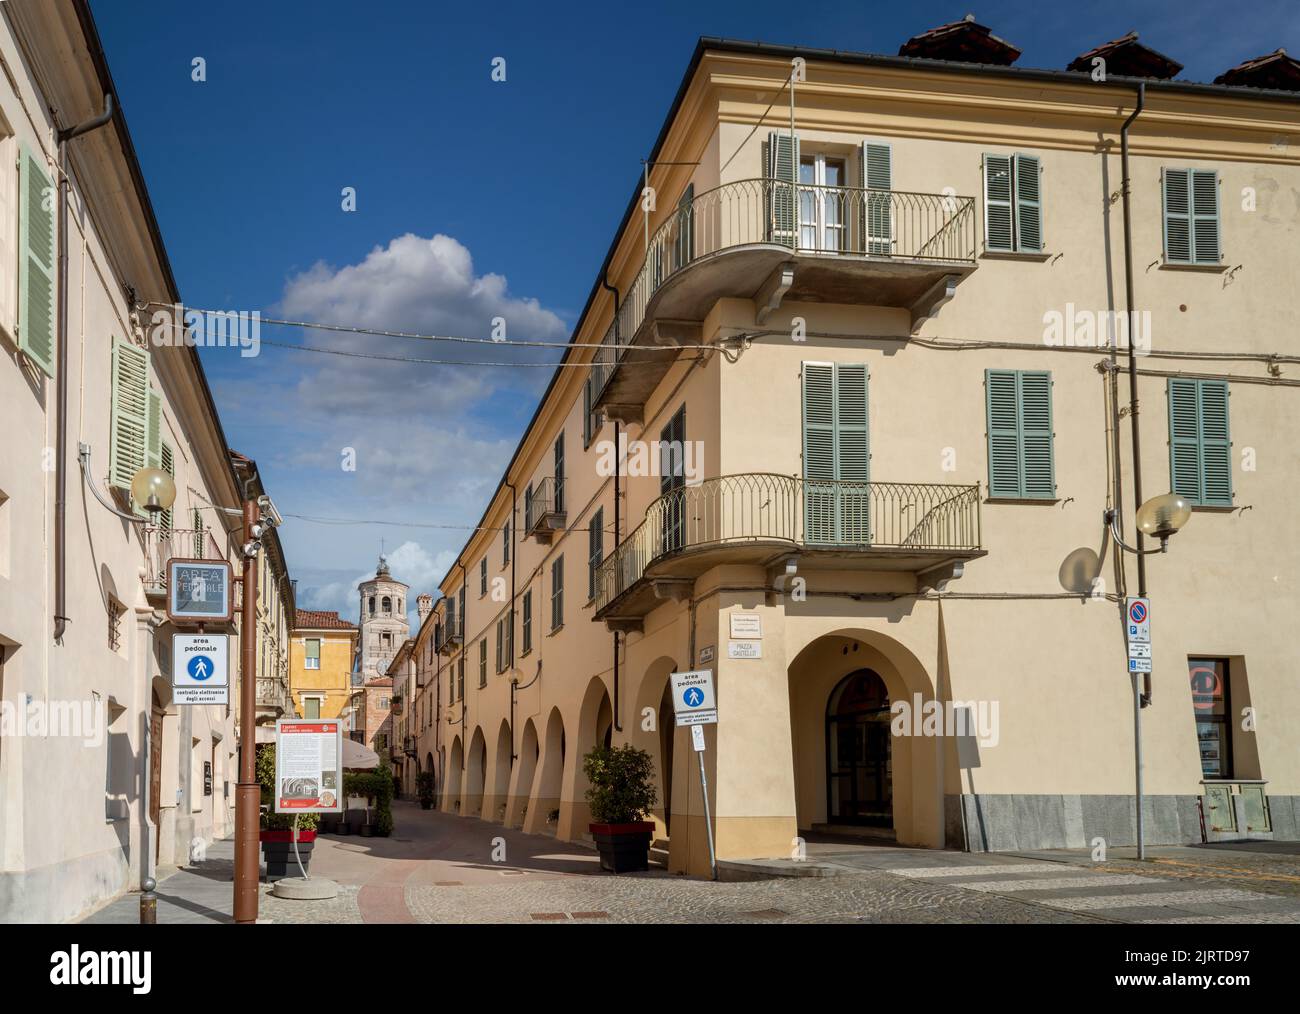 Fossano, Cuneo, Italy - August 25, 2022: the historic center with via Cavour, pedestrian street with arcades and the civic bell tower at the bottom, b Stock Photo